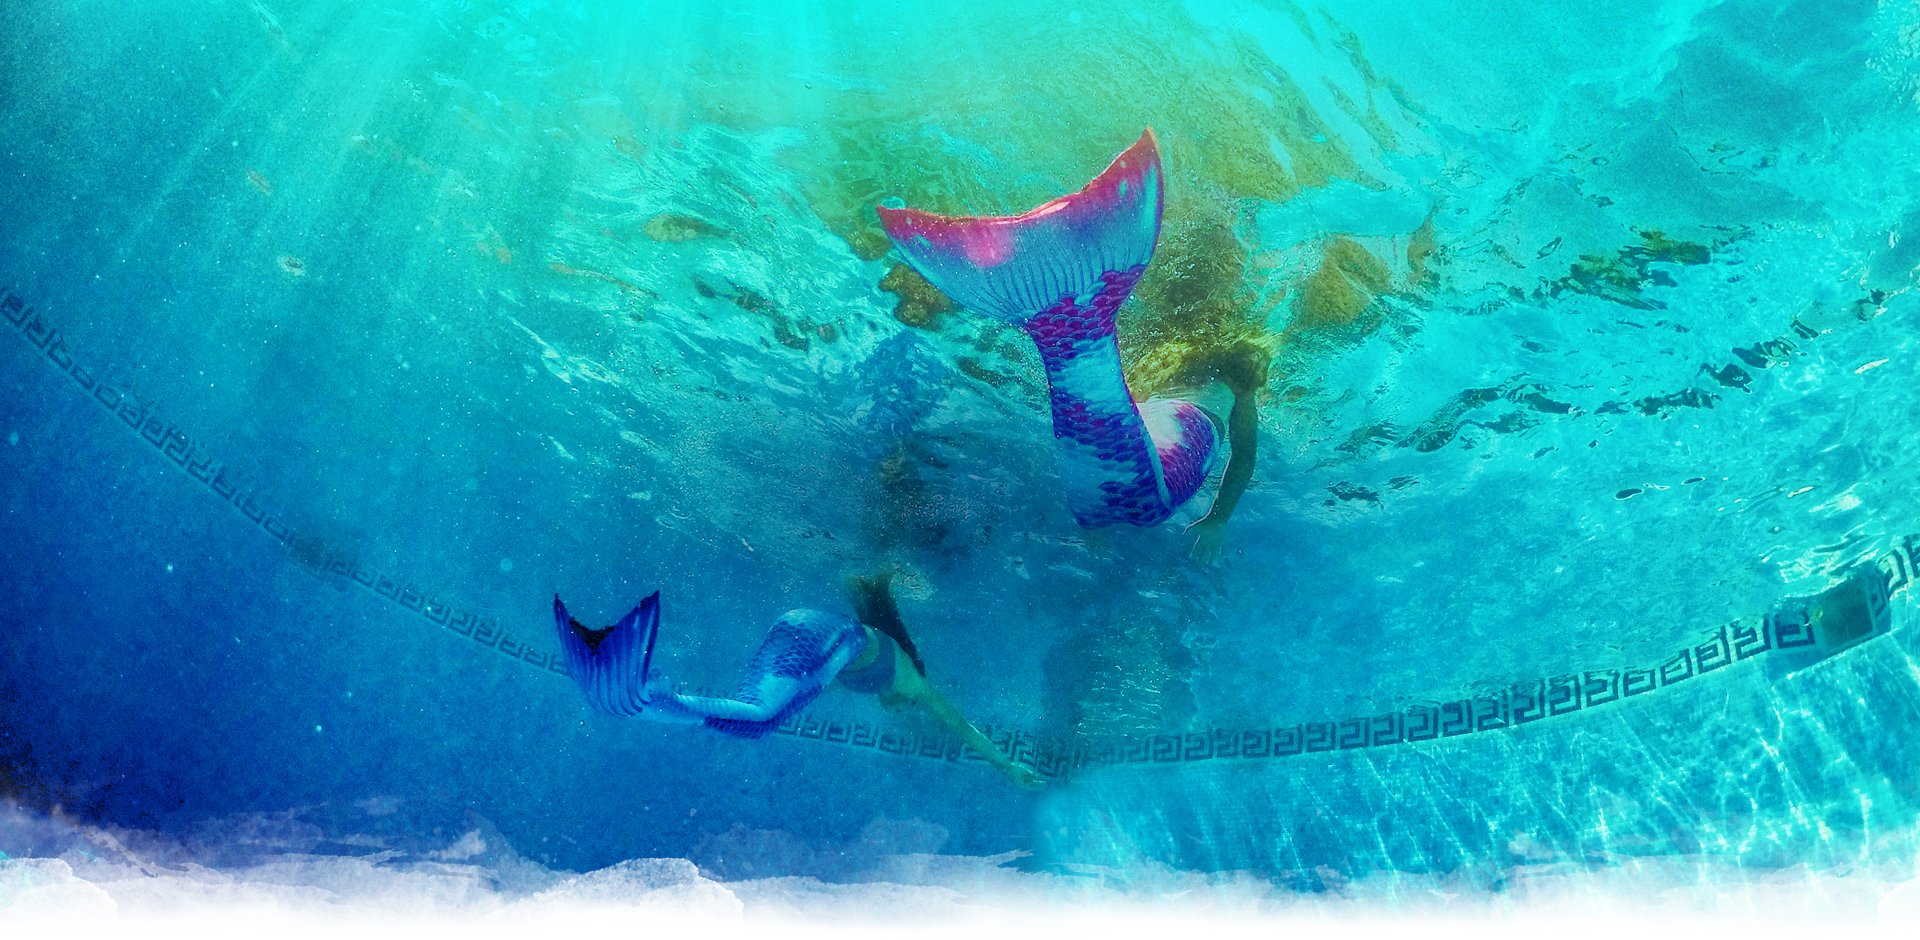 Mermaid Fin, Mermaid Swim and more Frequently Asked Questions